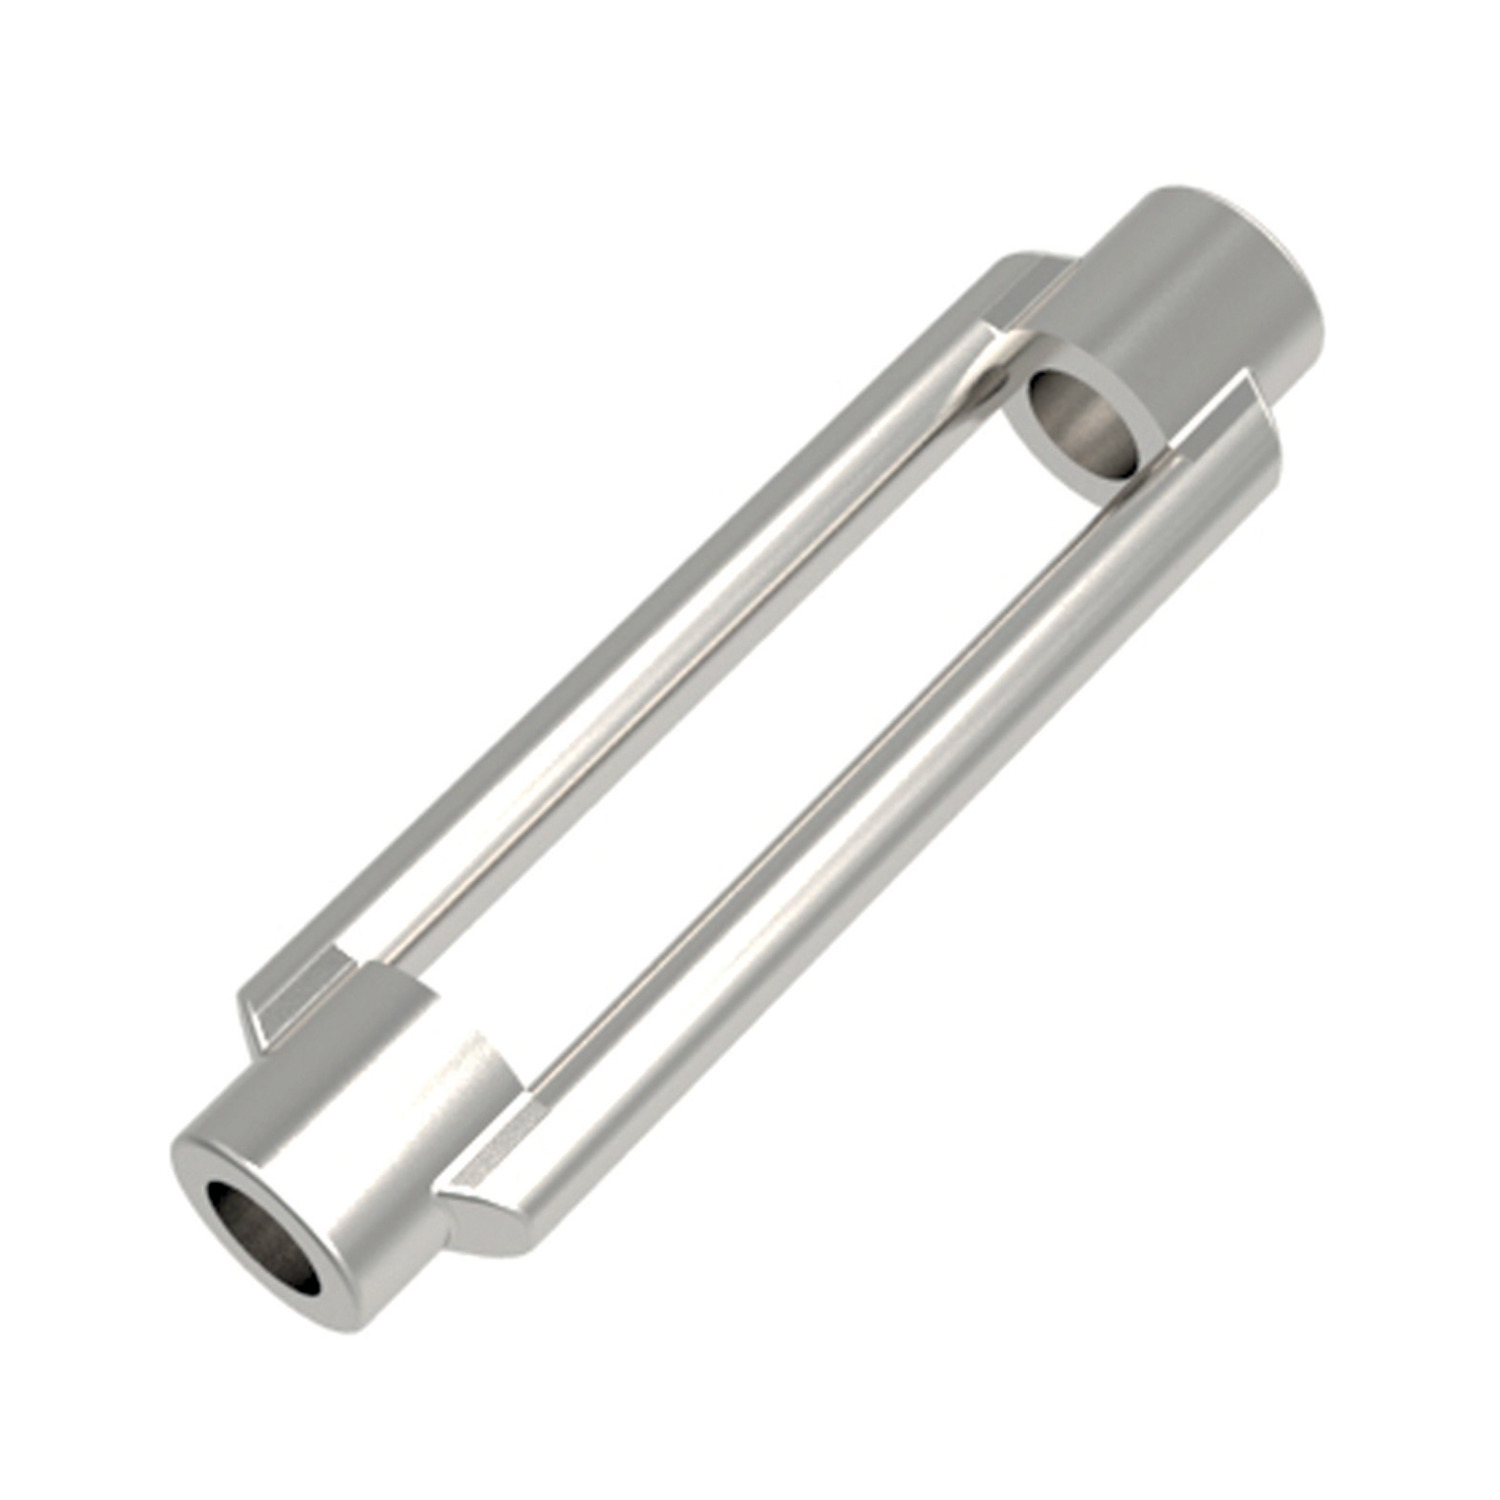 Product R3832, Turnbuckles stainless steel / 